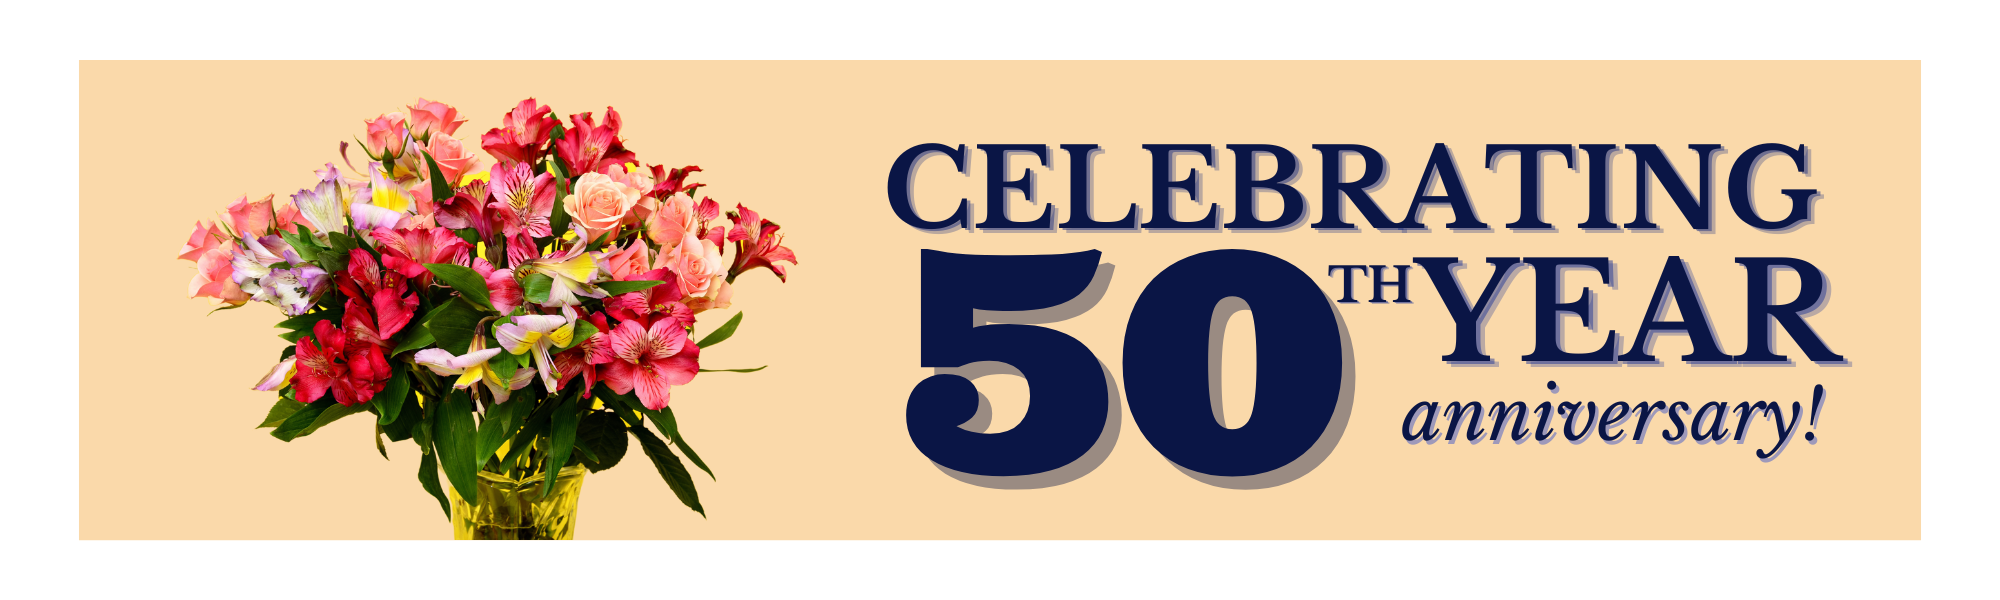 beautiful floral arrangement in graphic celebrating 50th anniversary 